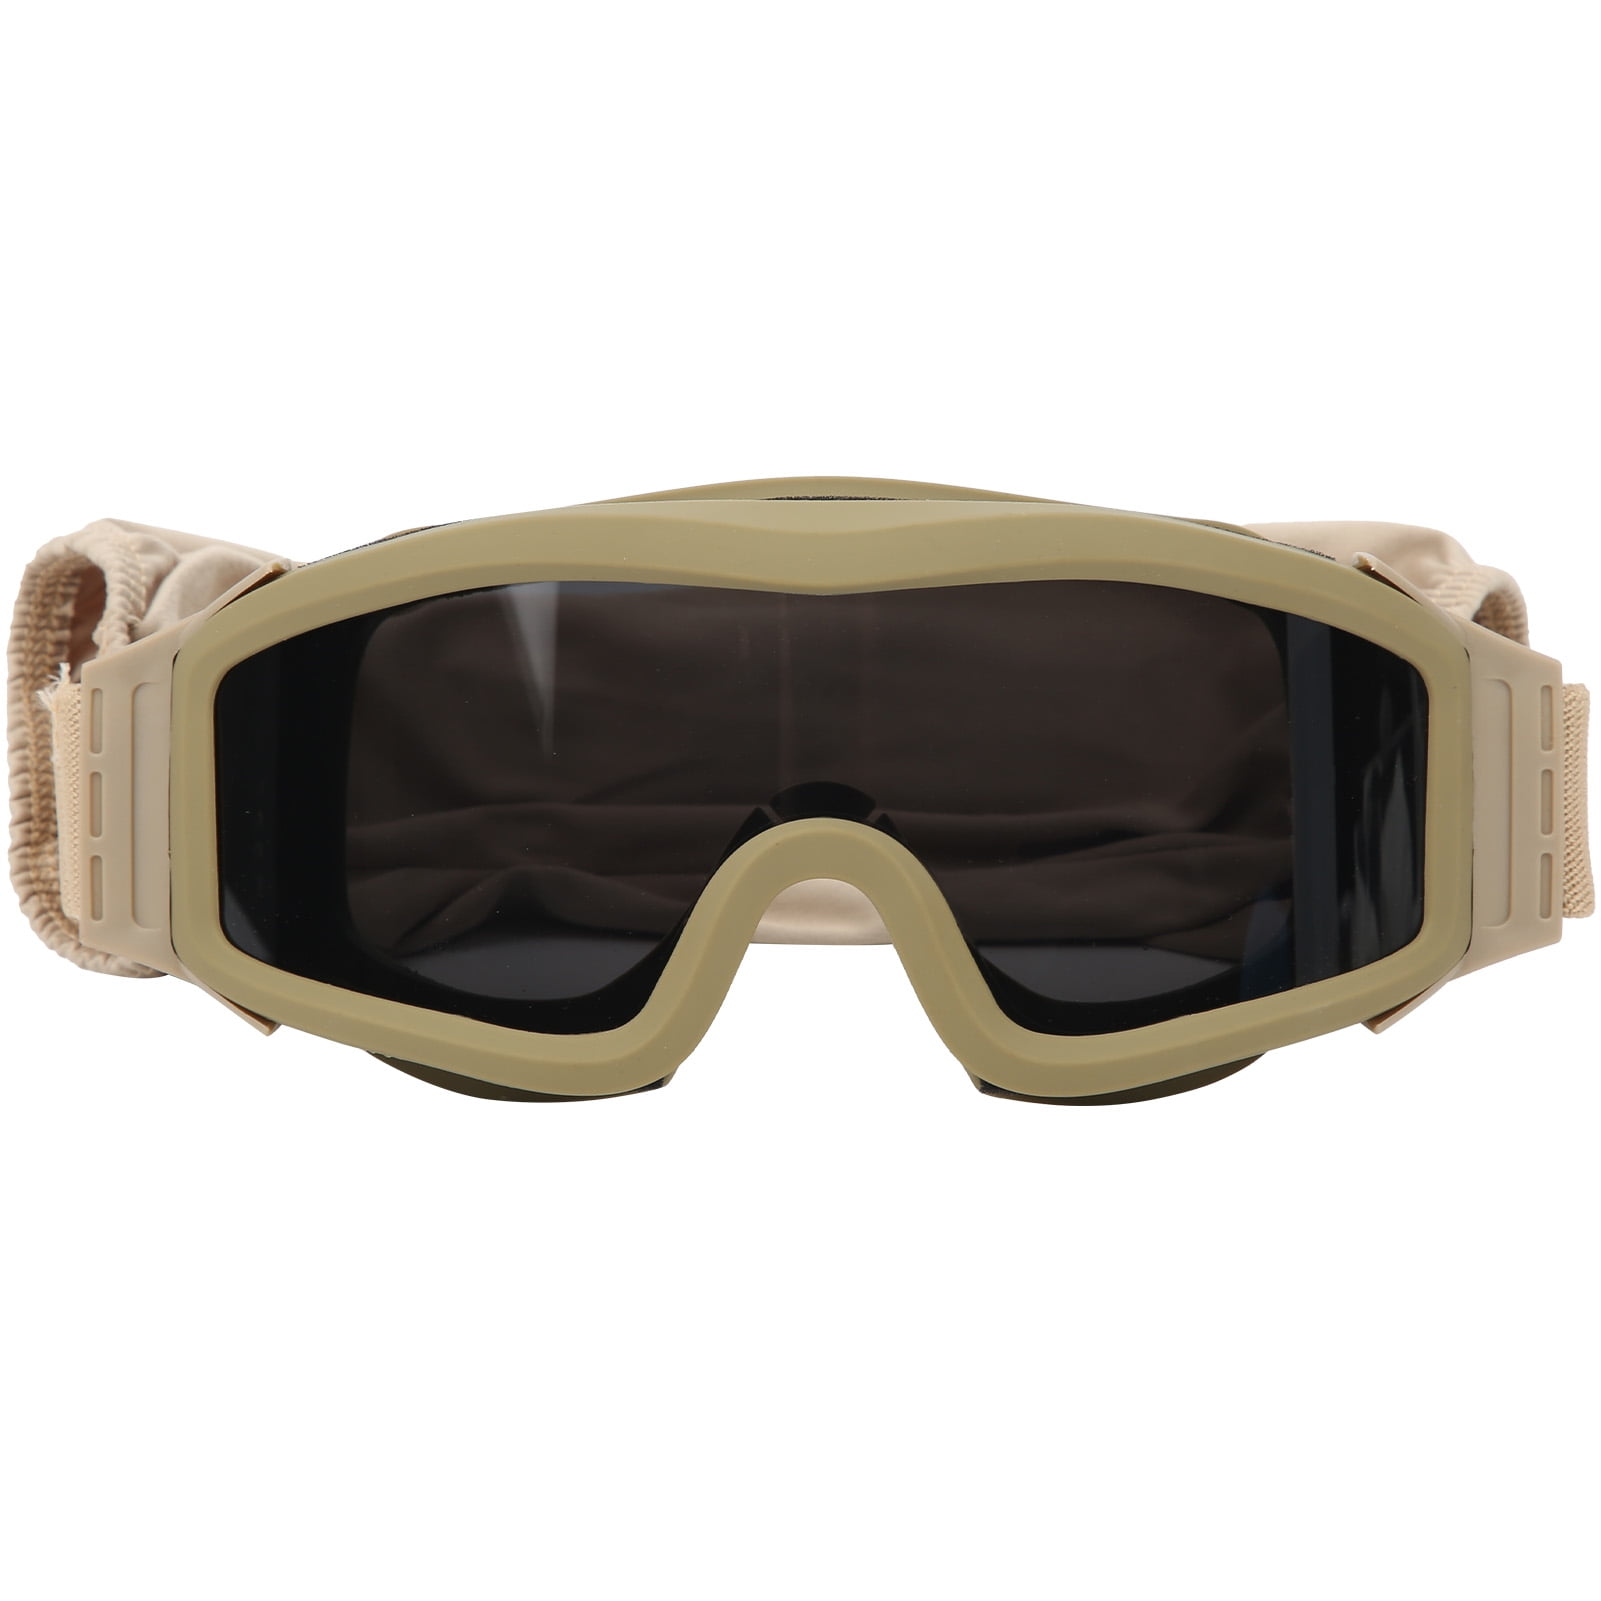 Kid Safety Glasses Goggles Anti-Explosion Protective Eyewear for gun to Lp 